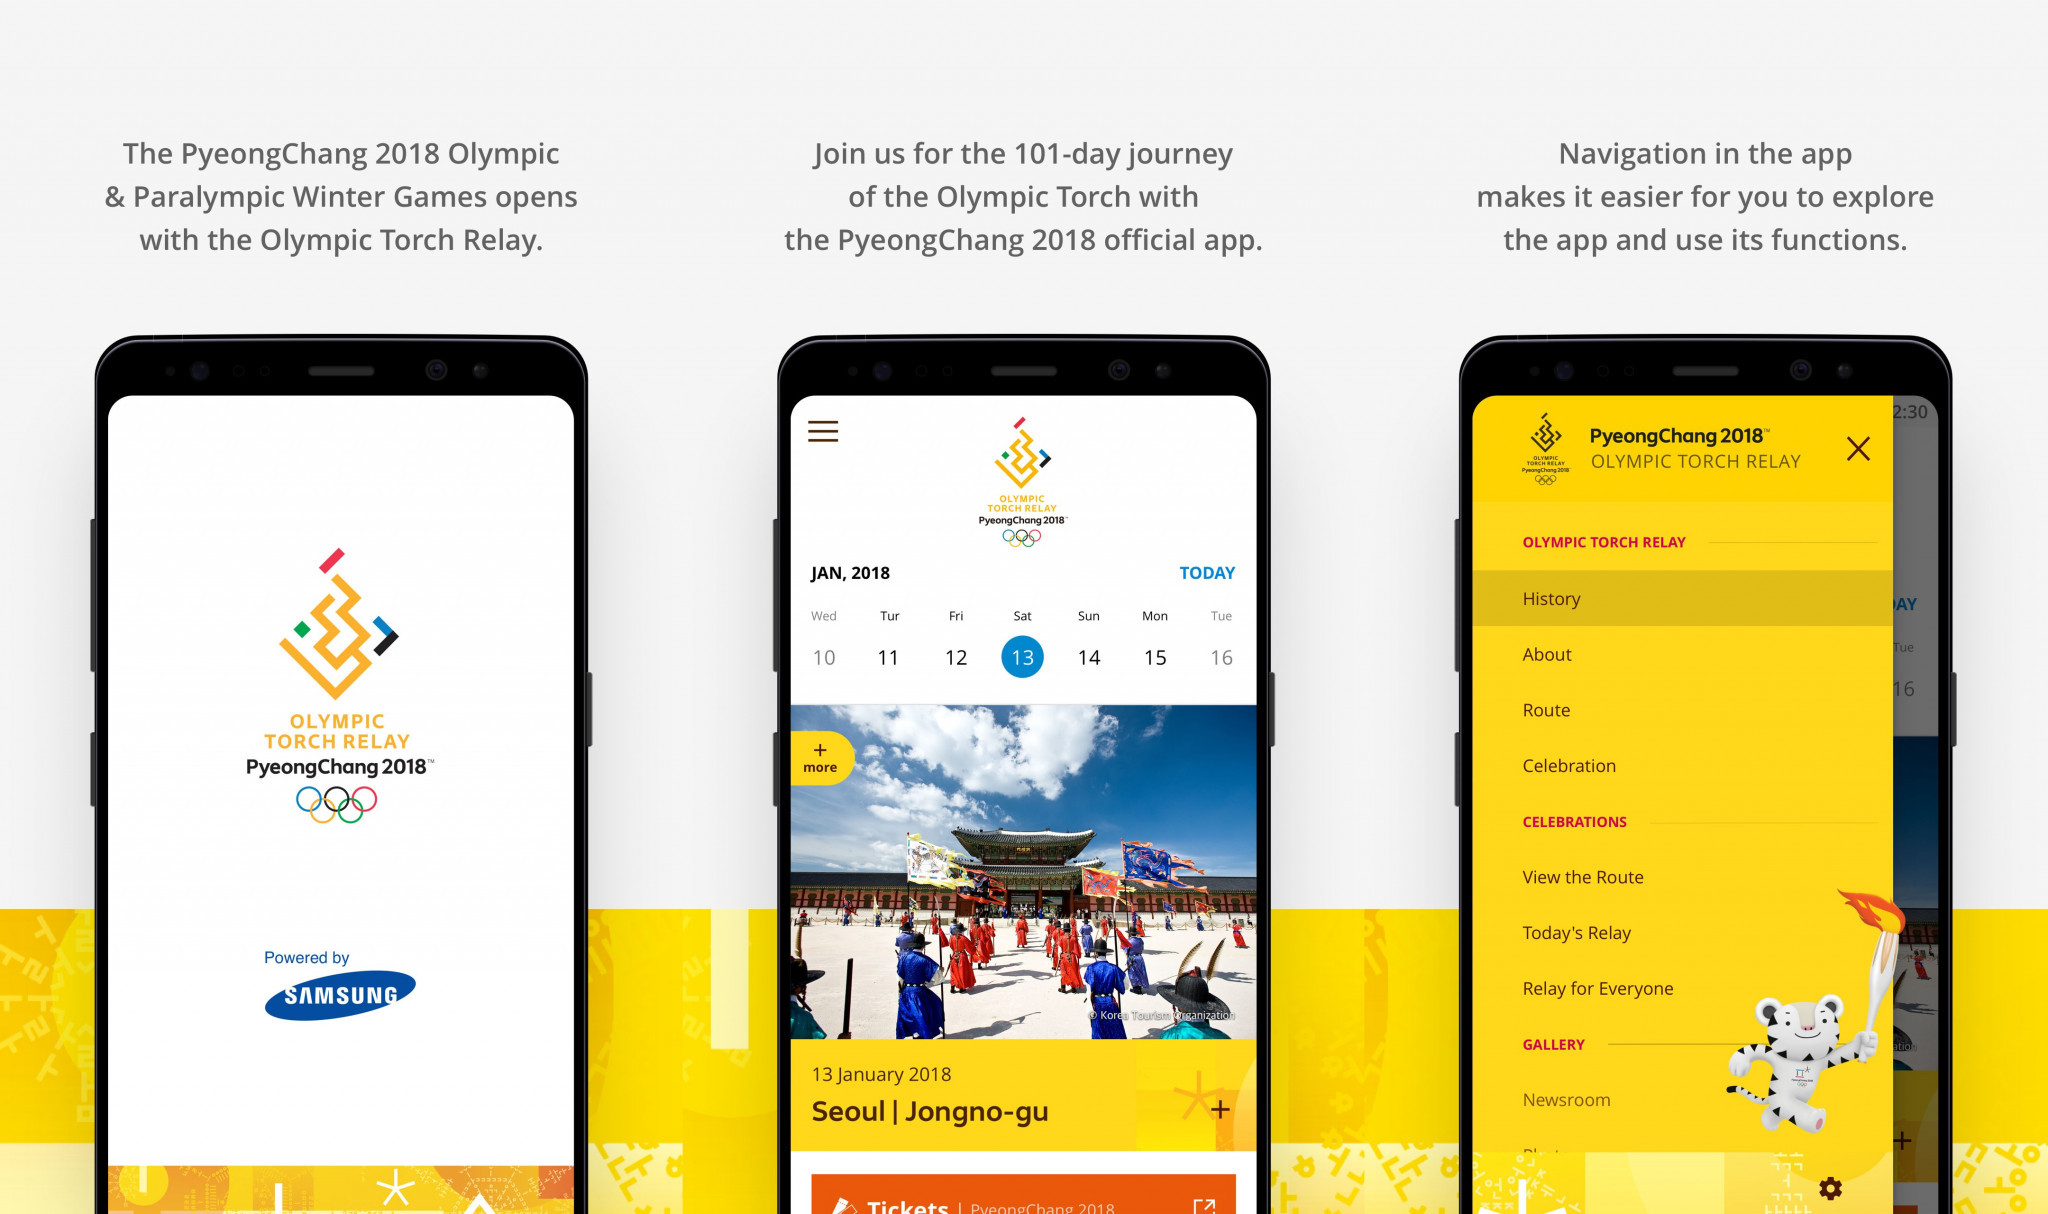 Pyeongchang 2018 has launched its official app for the Winter Olympics and Paralympics ©Pyeongchang 2018